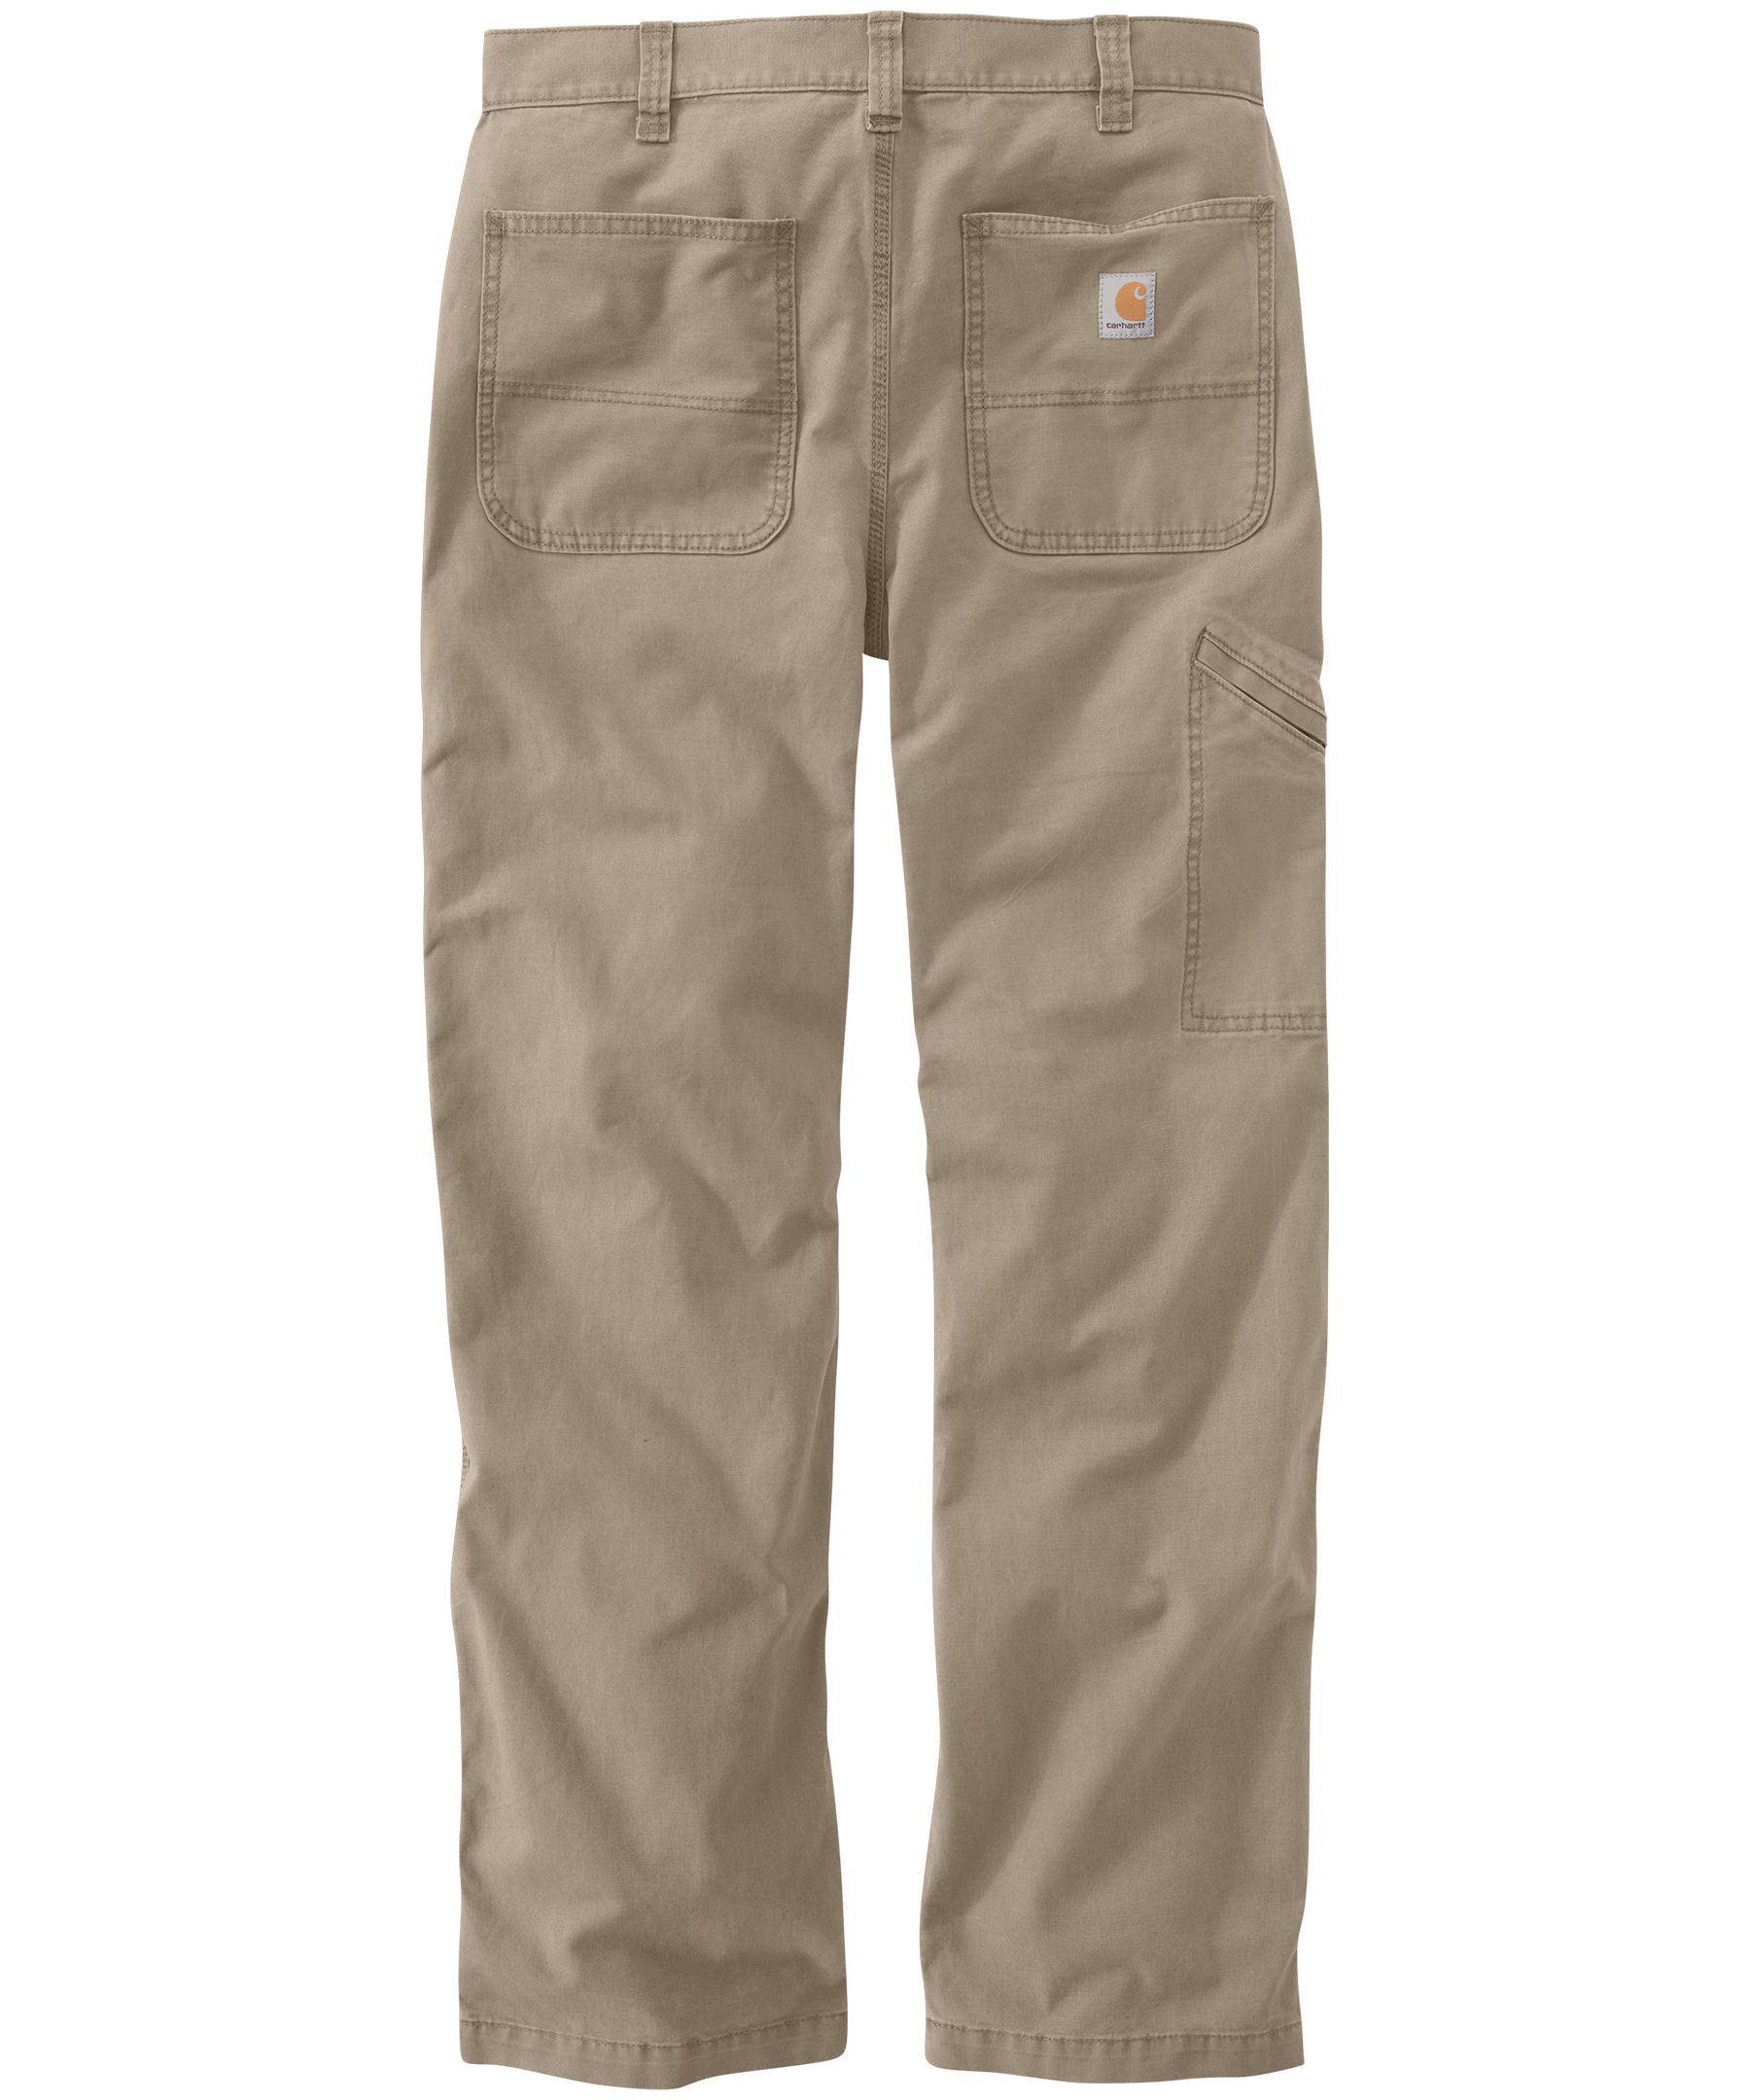 Carhartt WIP Pants for Men - Shop Now at Farfetch Canada